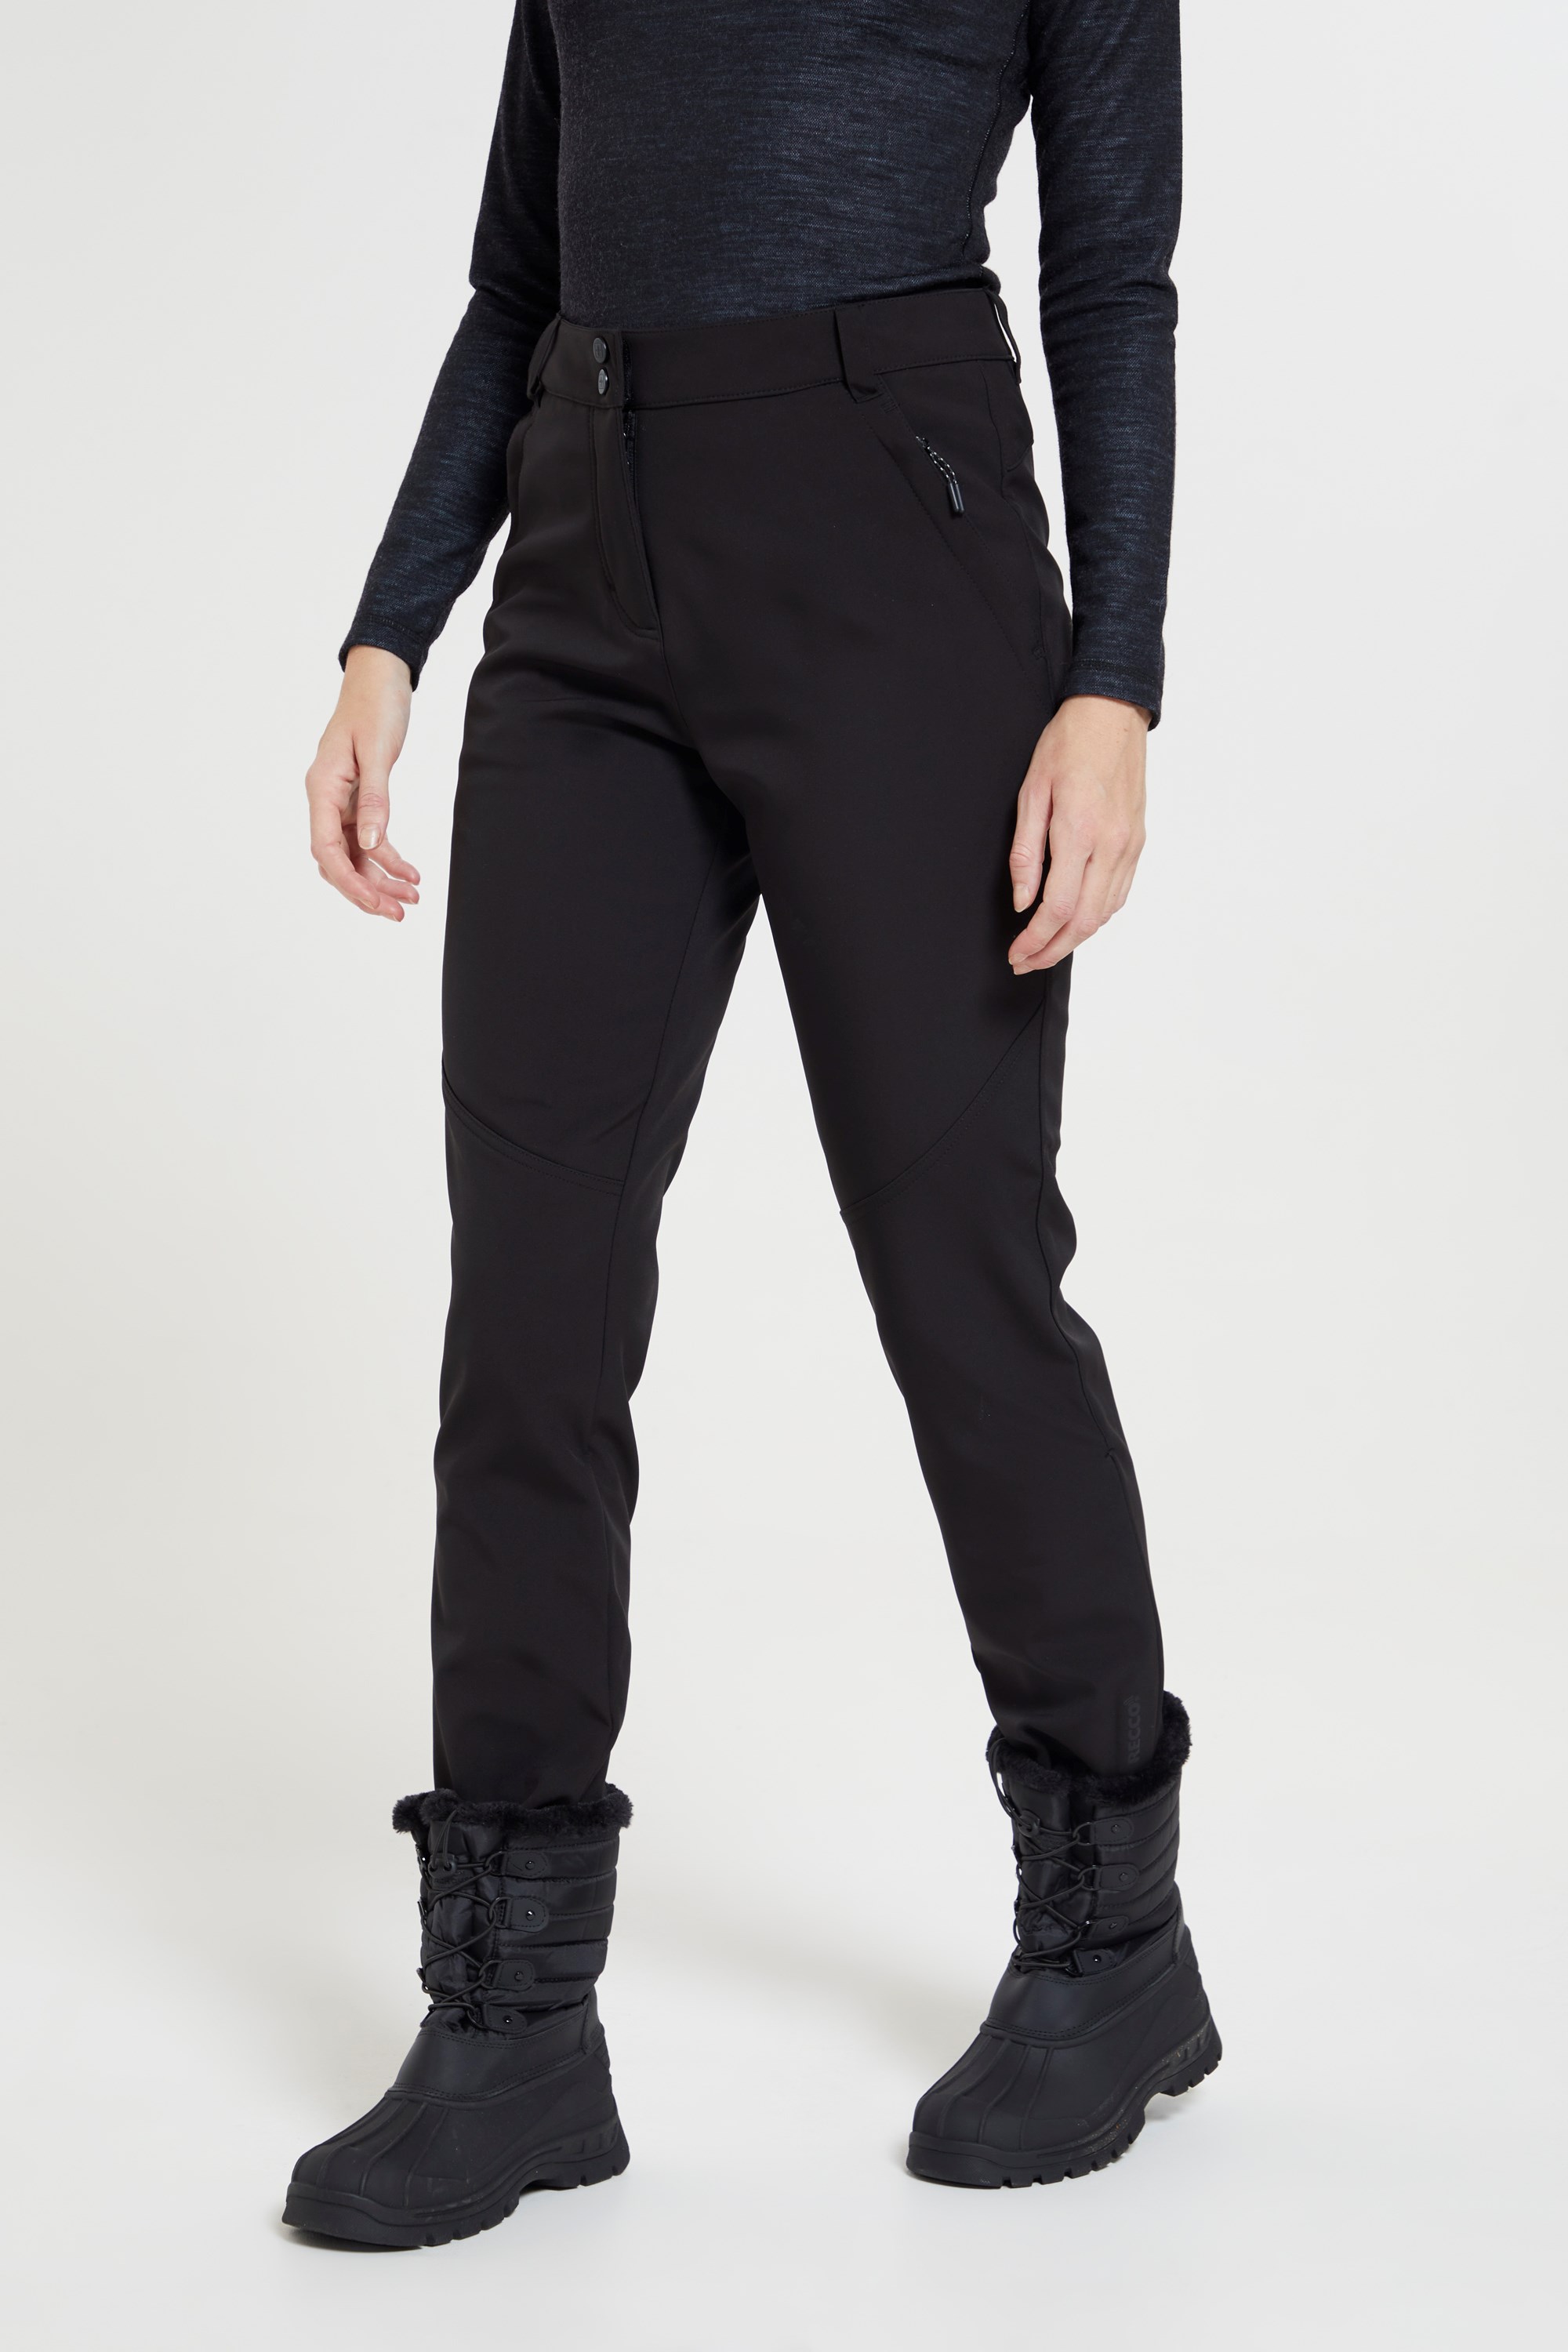 Ladies Craghoppers Kiwi Pro Stretch Trouser - Craghoppers - Waterproof  Trousers | CCW Clothing